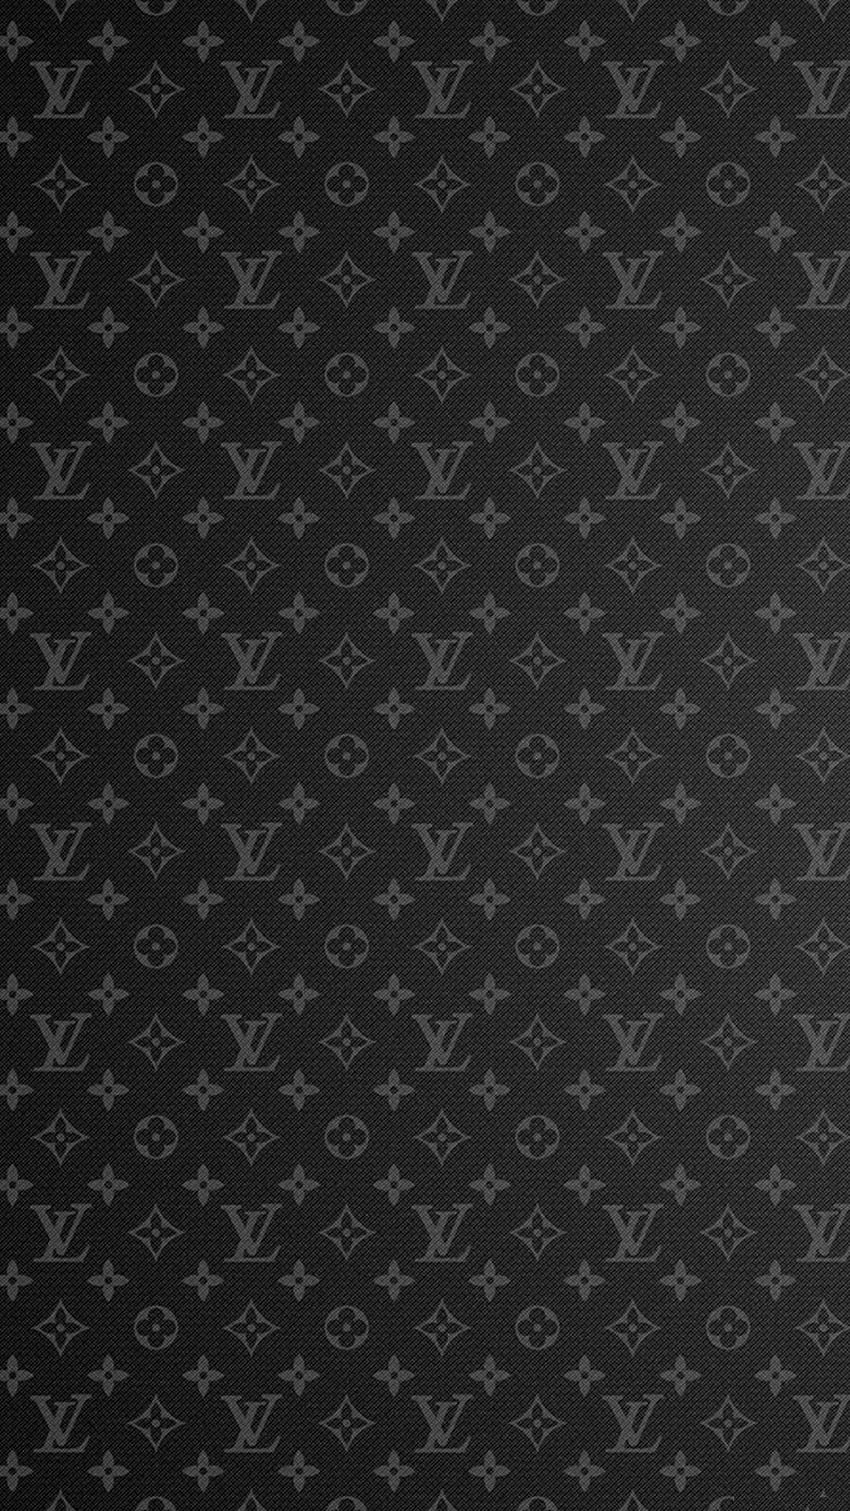 L V Black Leather wallpaper by K_a_r_m_a_ - Download on ZEDGE™